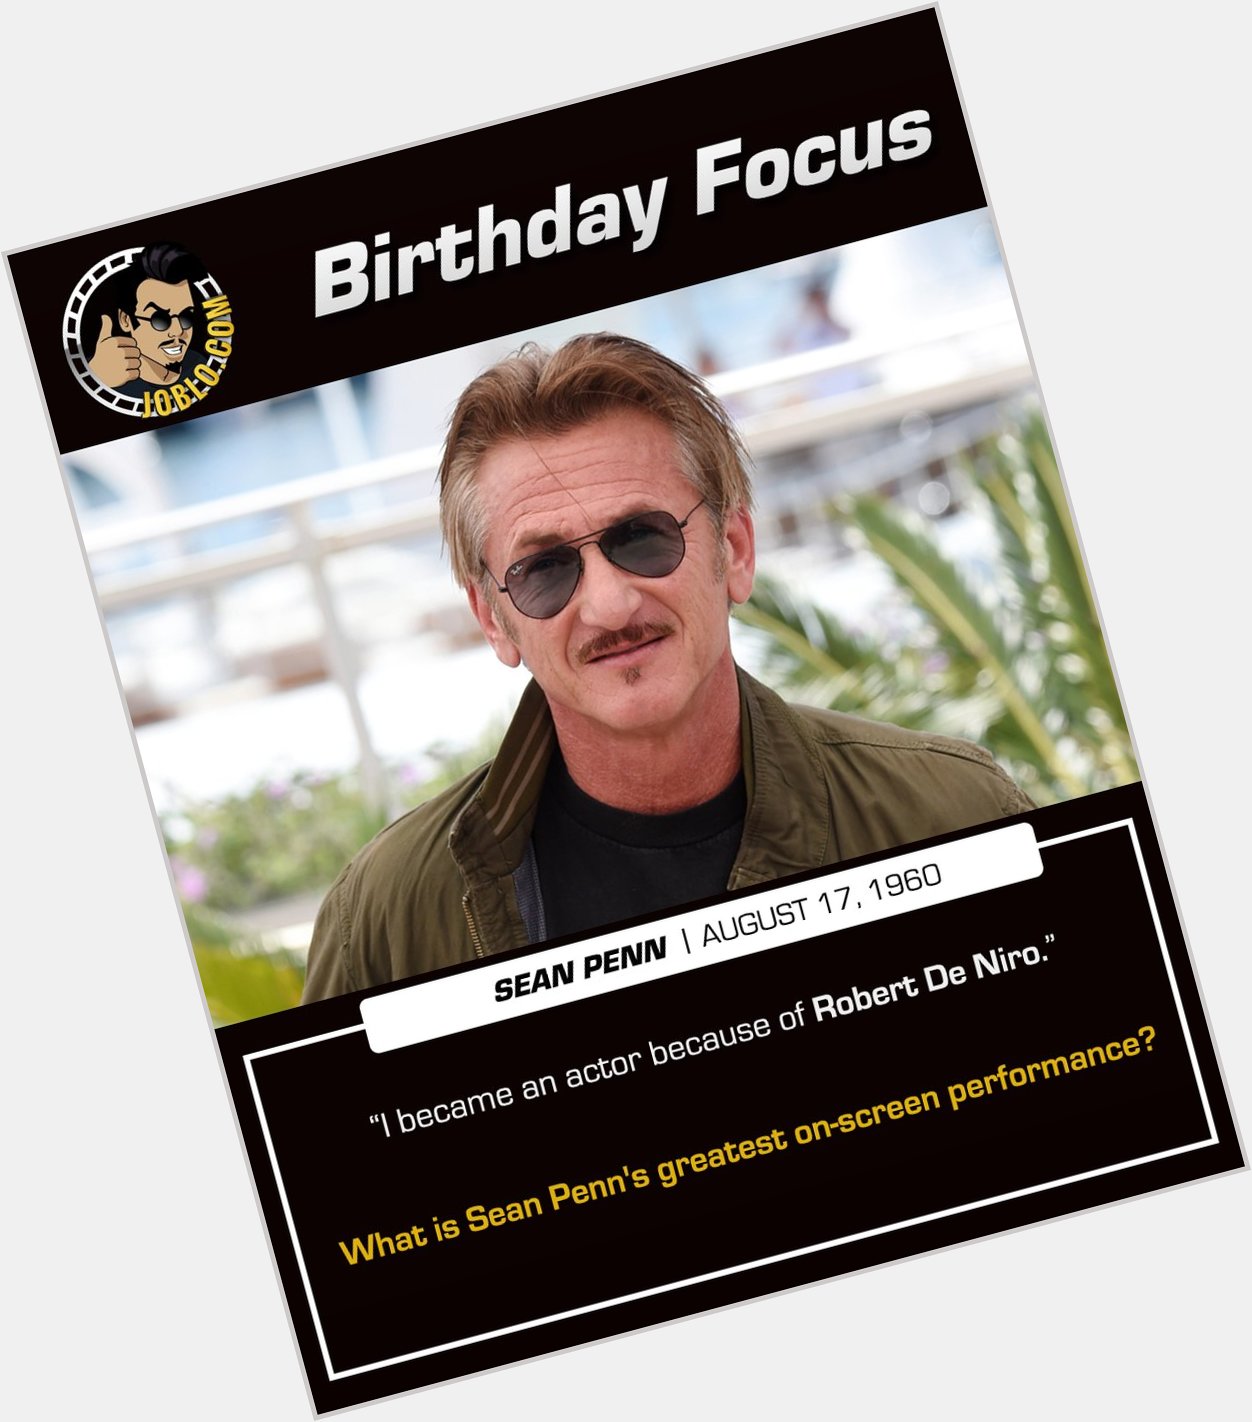 Happy 60th birthday to Sean Penn!

What do you think is his best on-screen performance? 